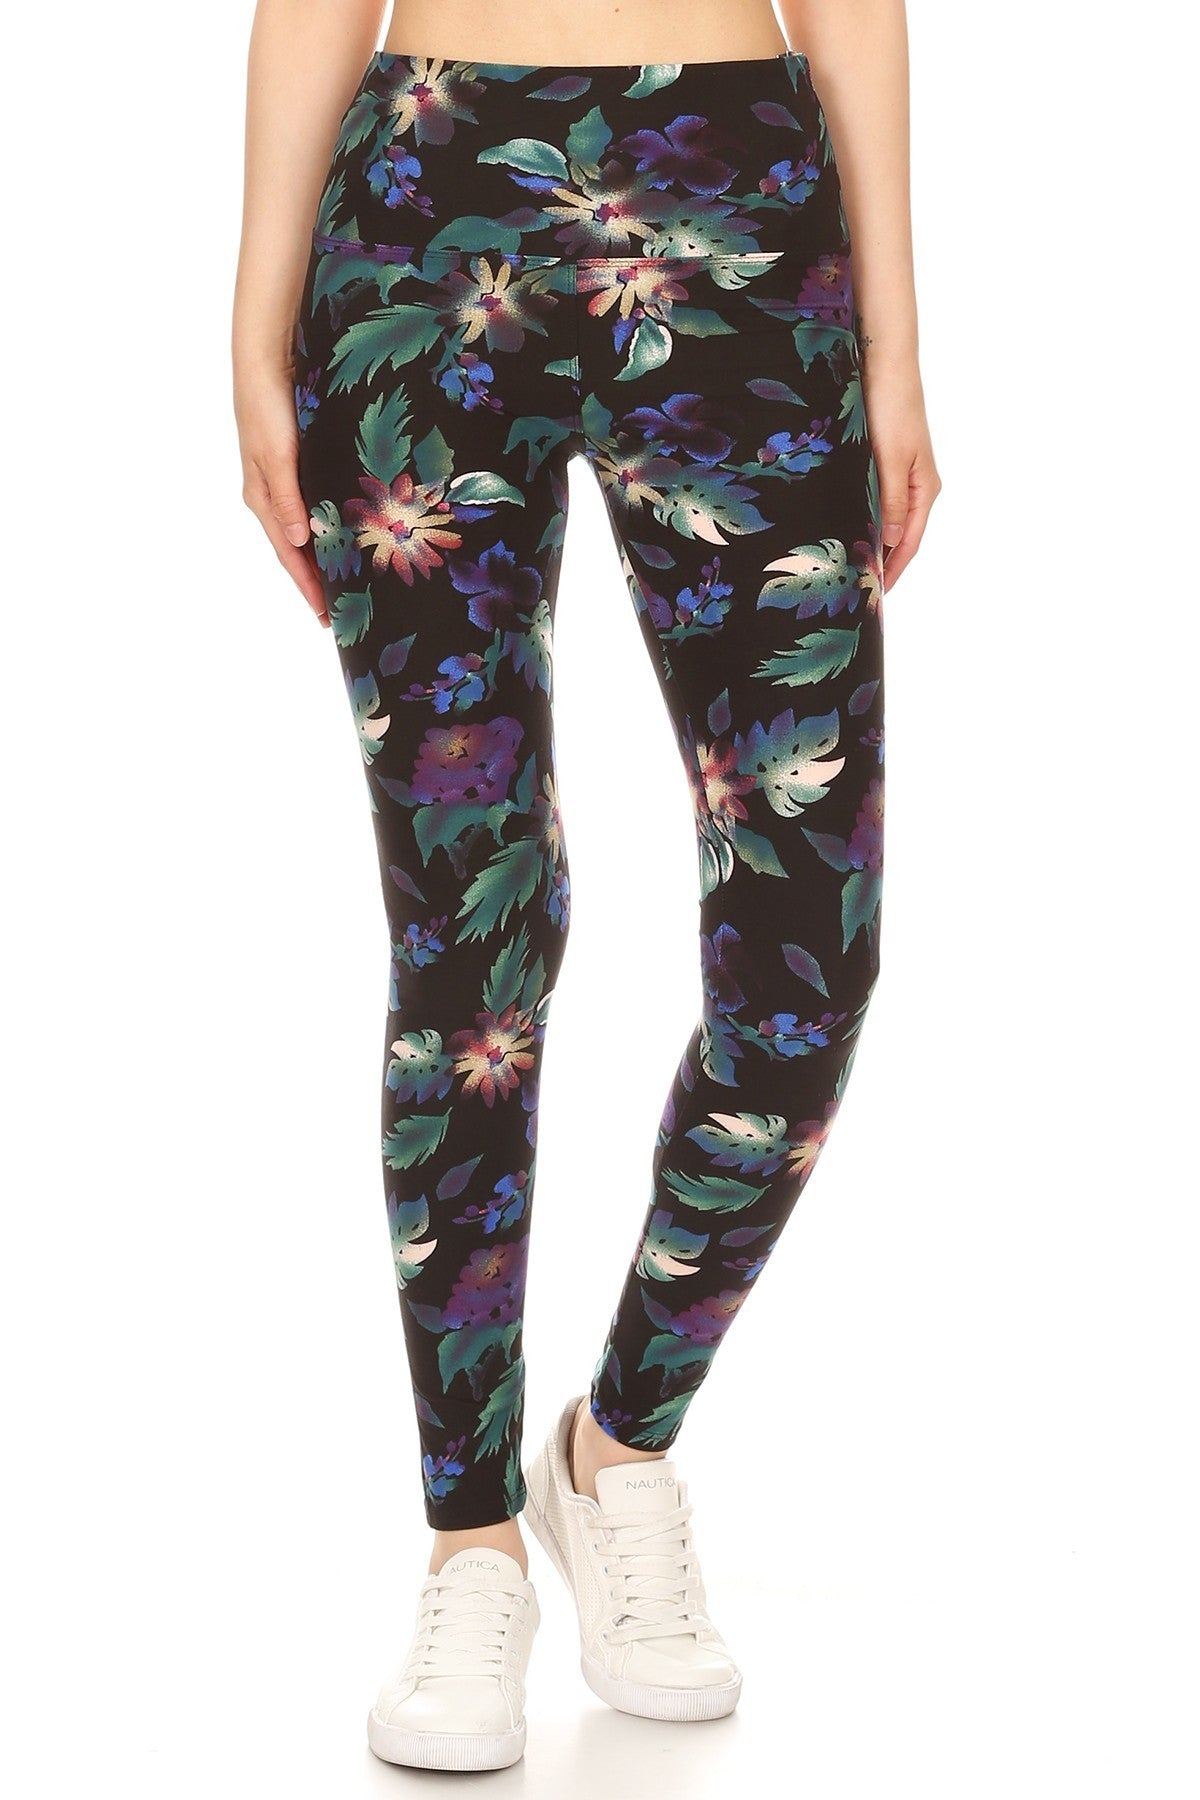 Yoga Style Floral Printed Knit Legging